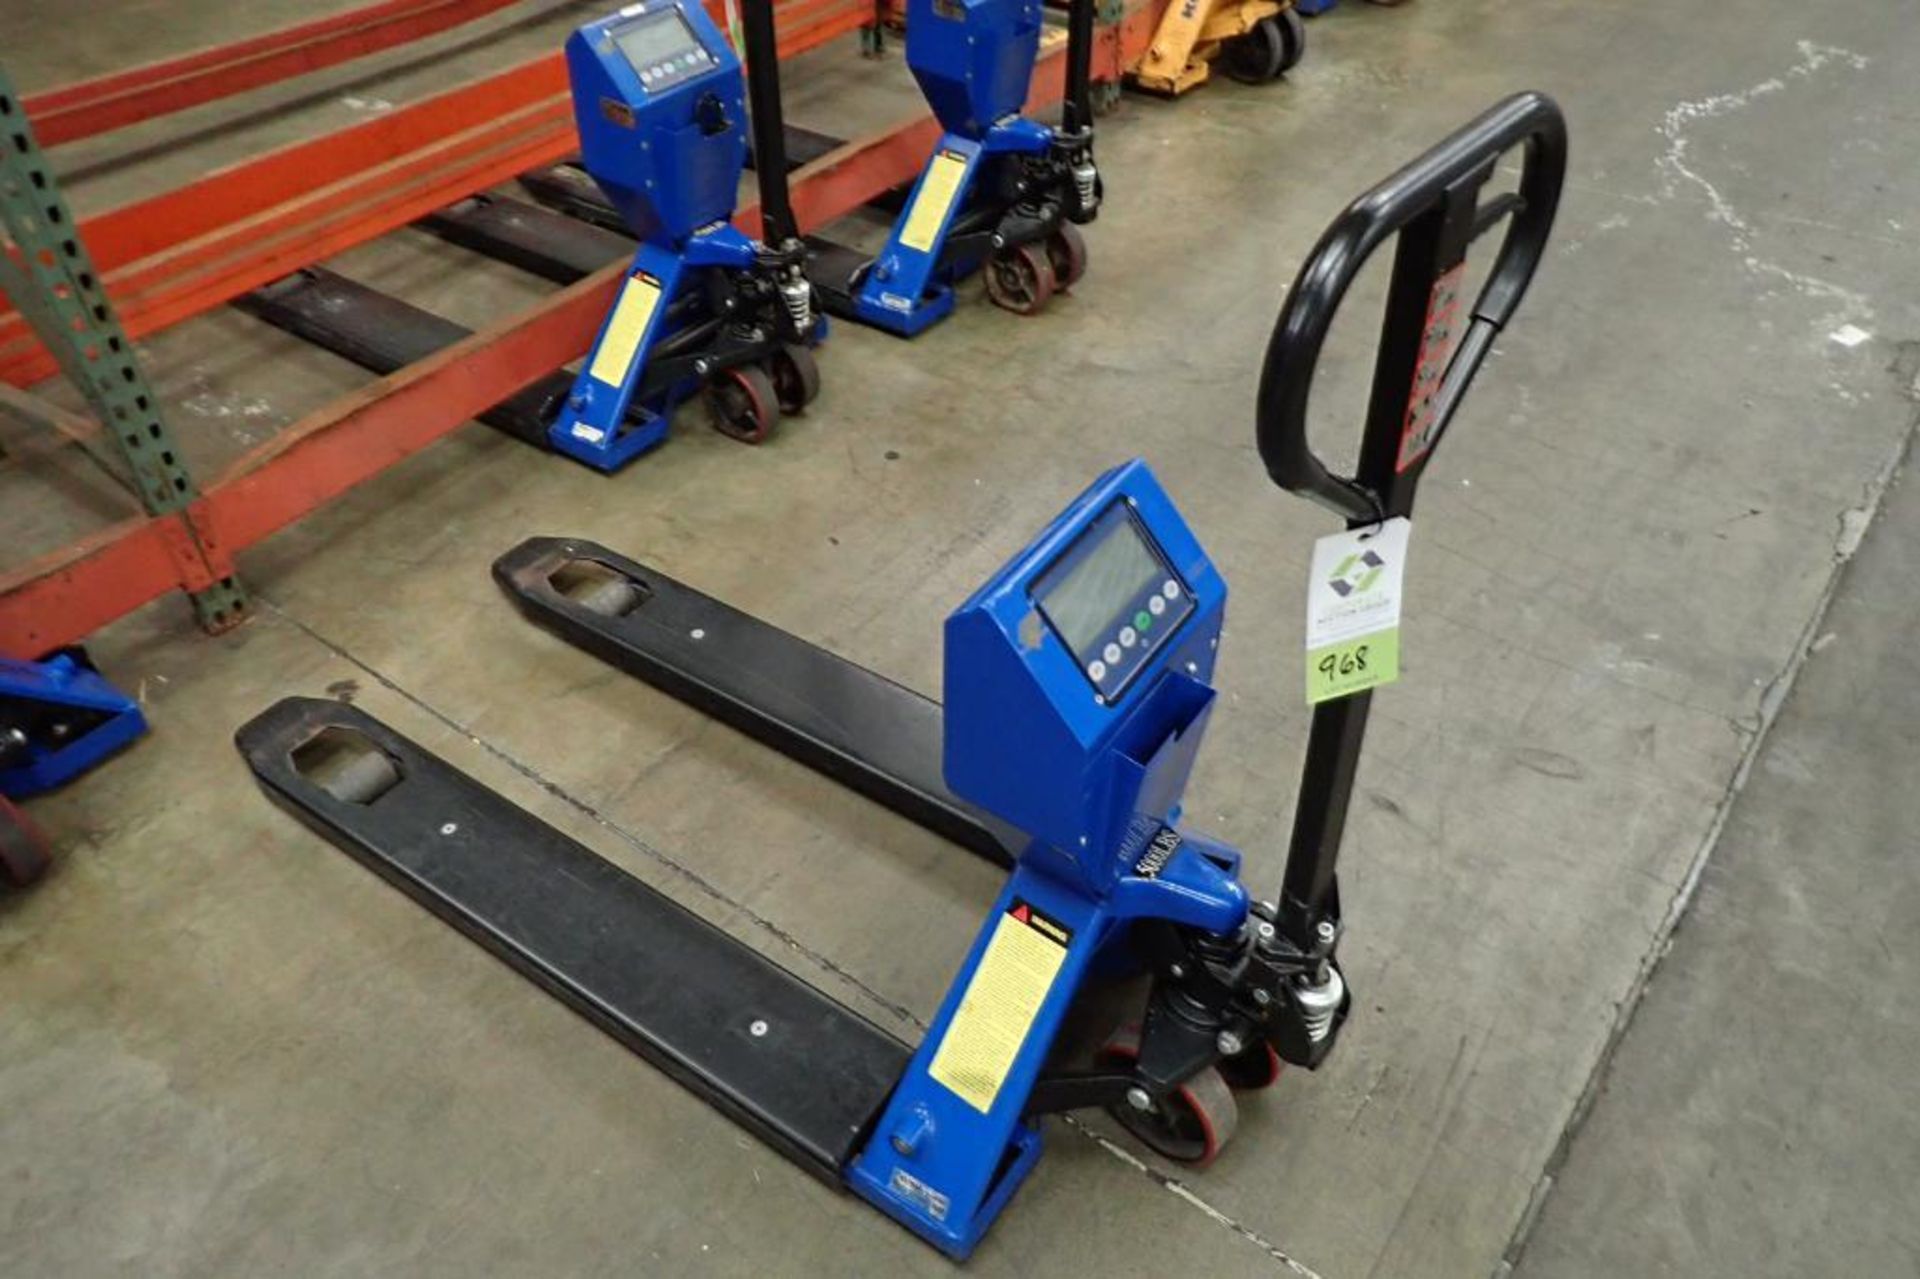 Global Industrial hand pallet jack, SN 382336 with Mettler Toledo on board scale, 5000 lb capacity,